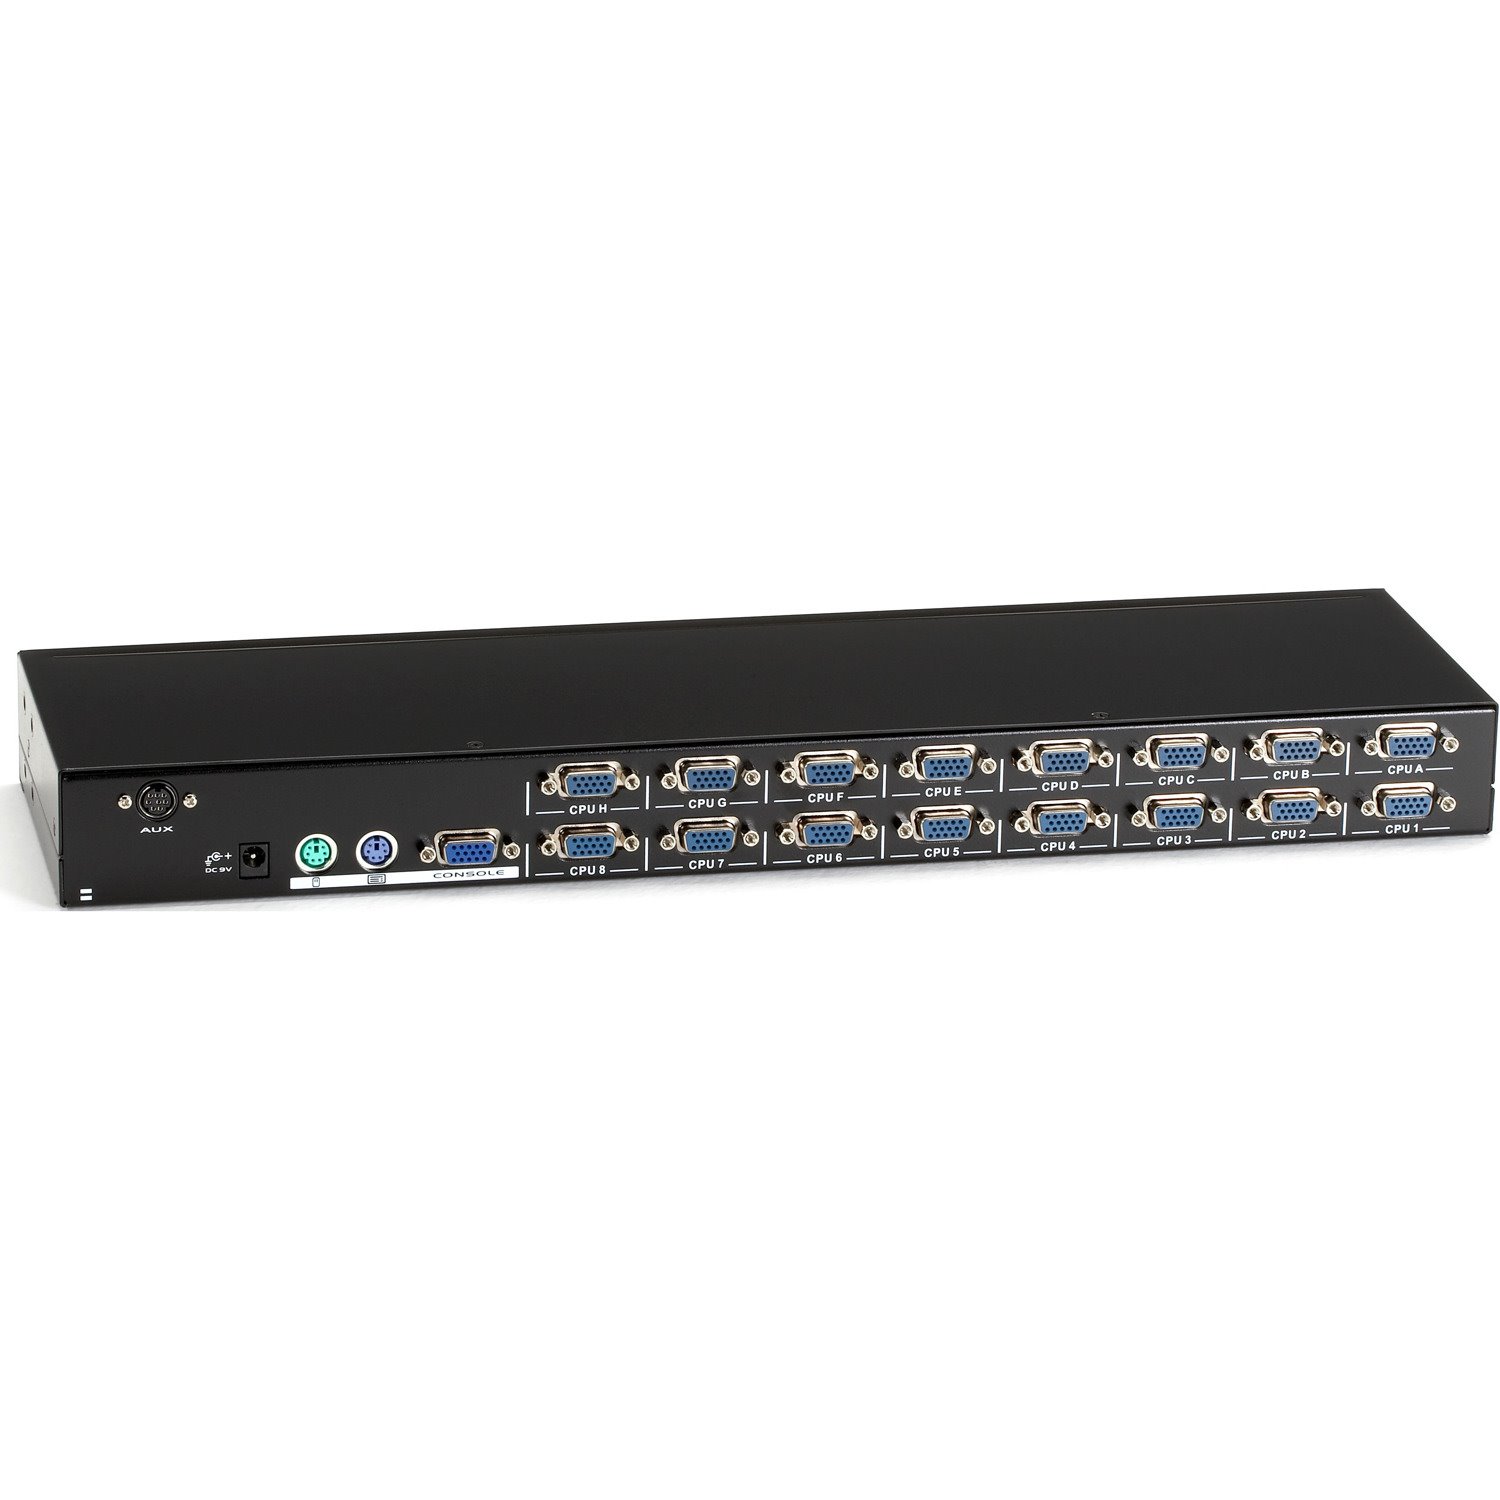 Black Box EC Series KVM Switch for PS/2 Servers and Consoles, 16-Port